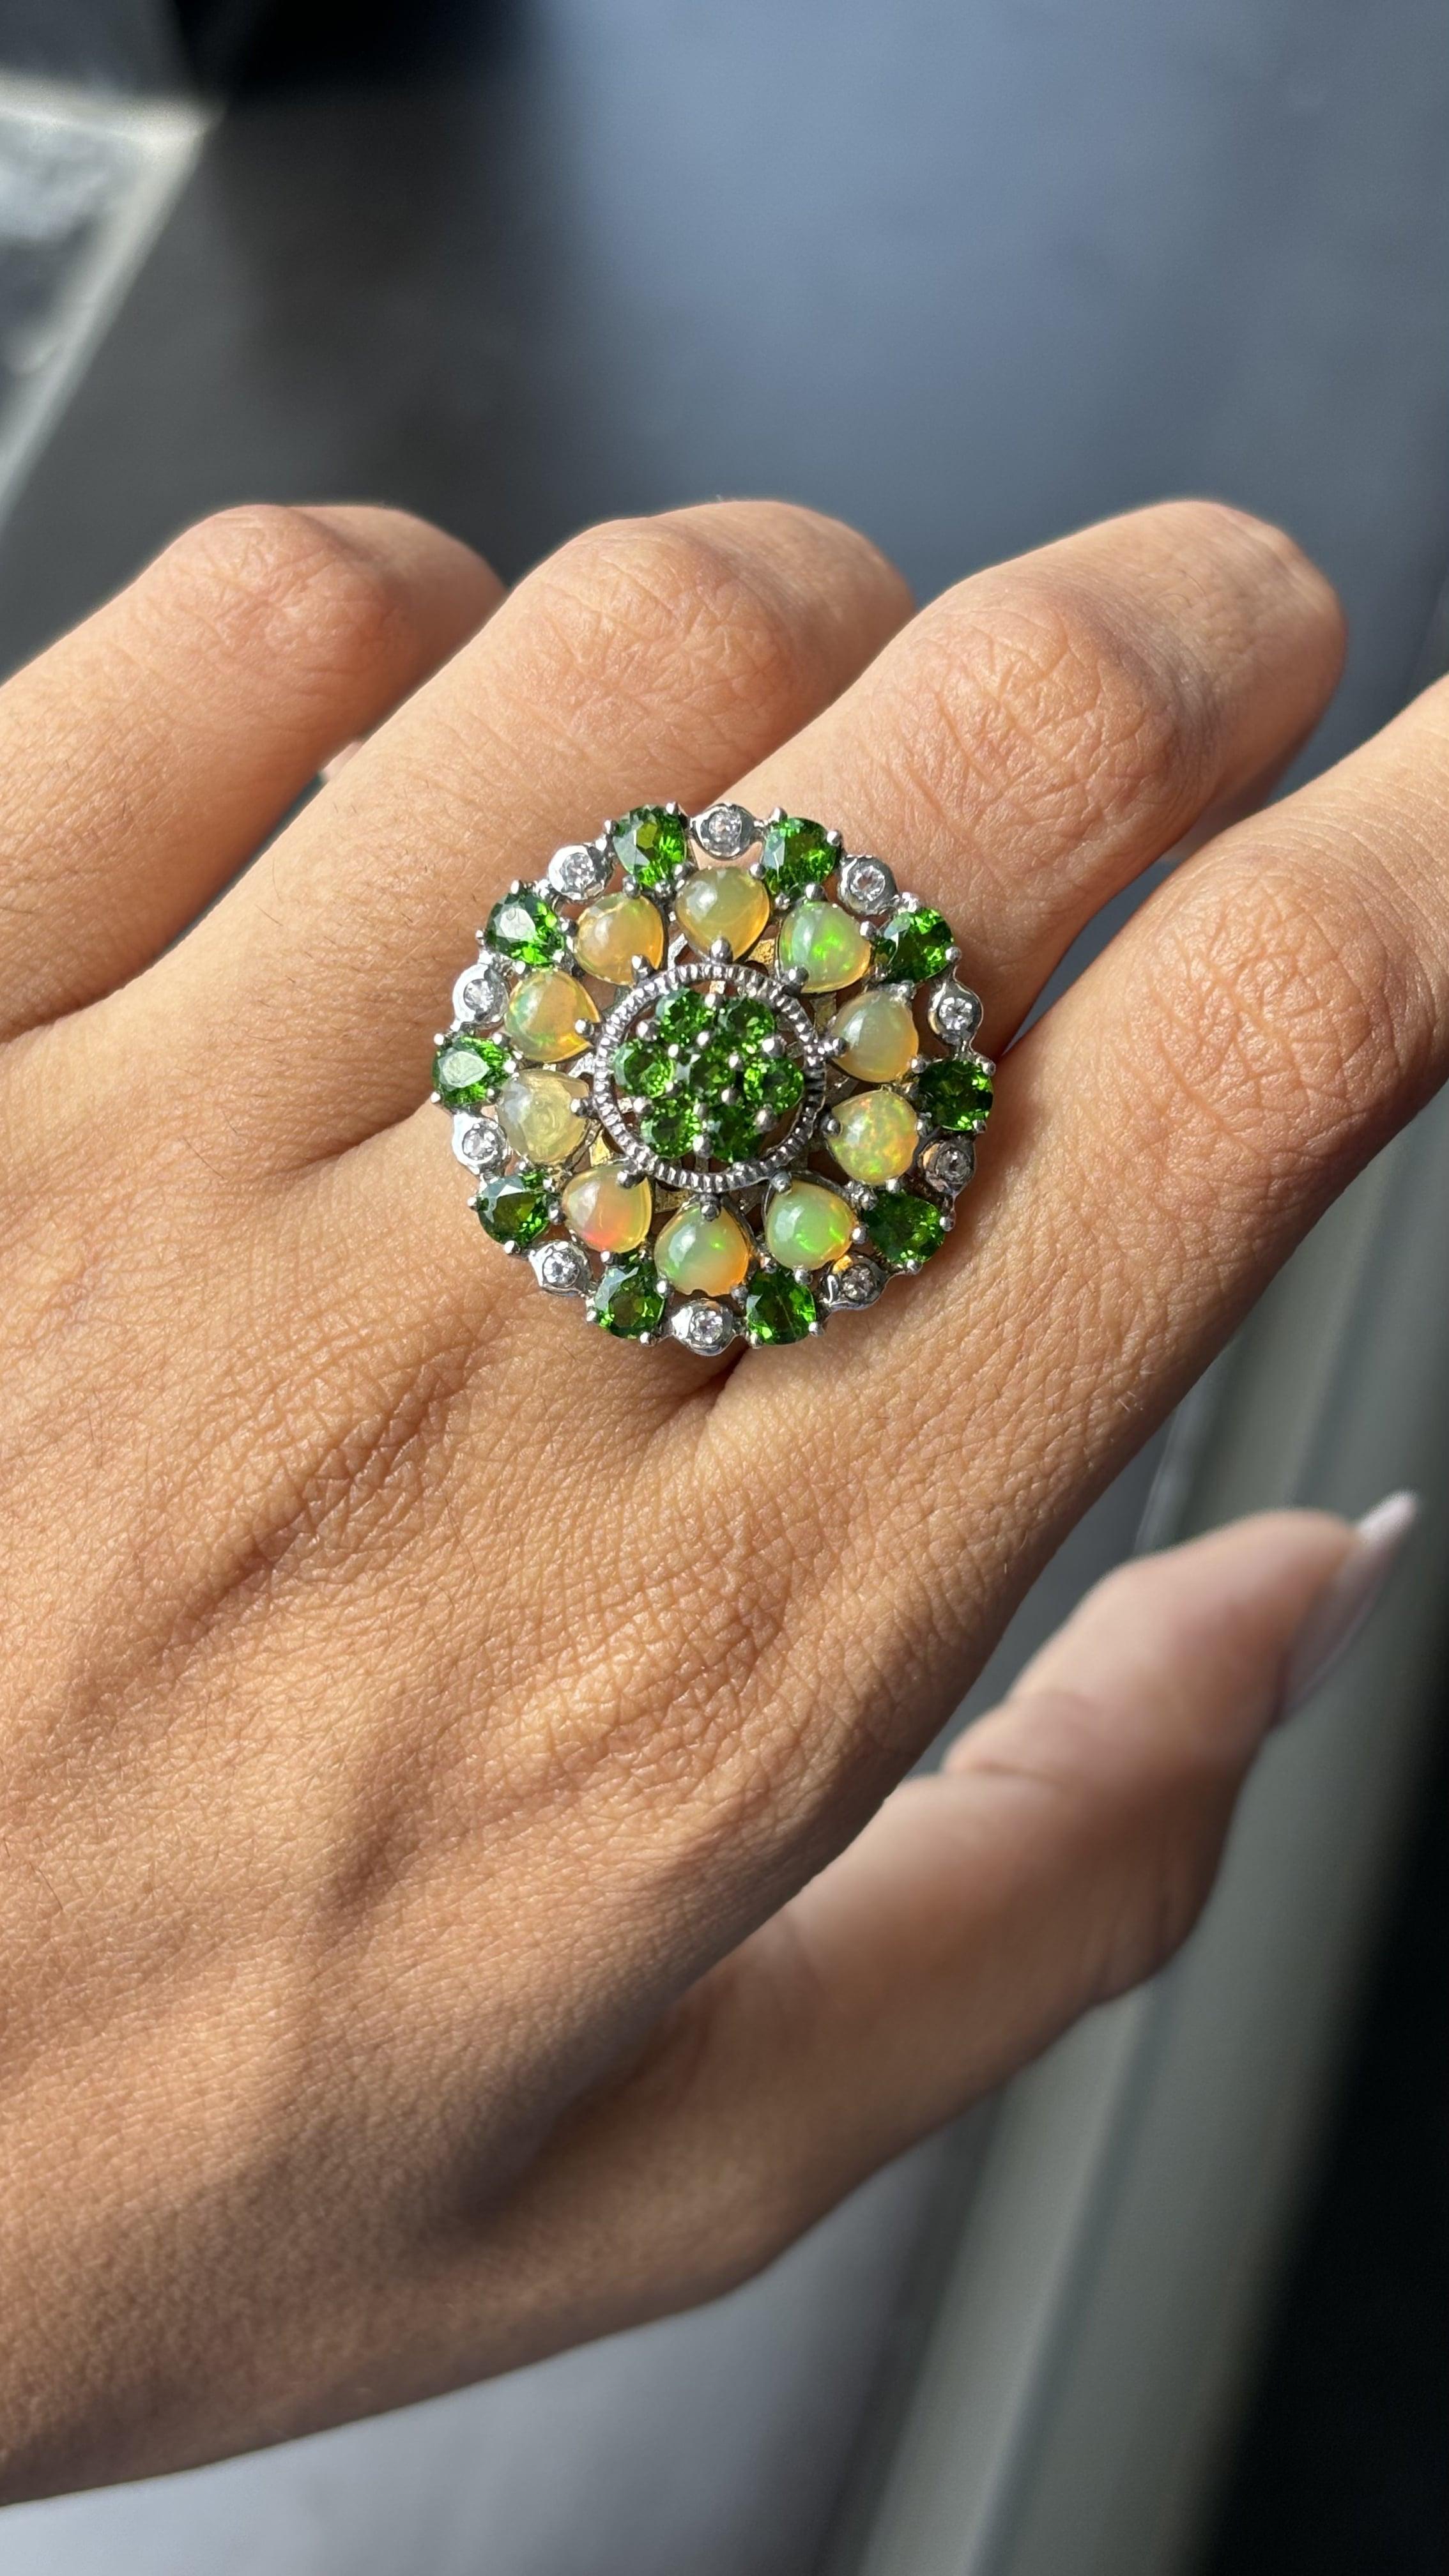 Taille ronde Antique circa 1900s Diopside, Opal & White Topaz Fancy Cocktail Ring in Silver en vente